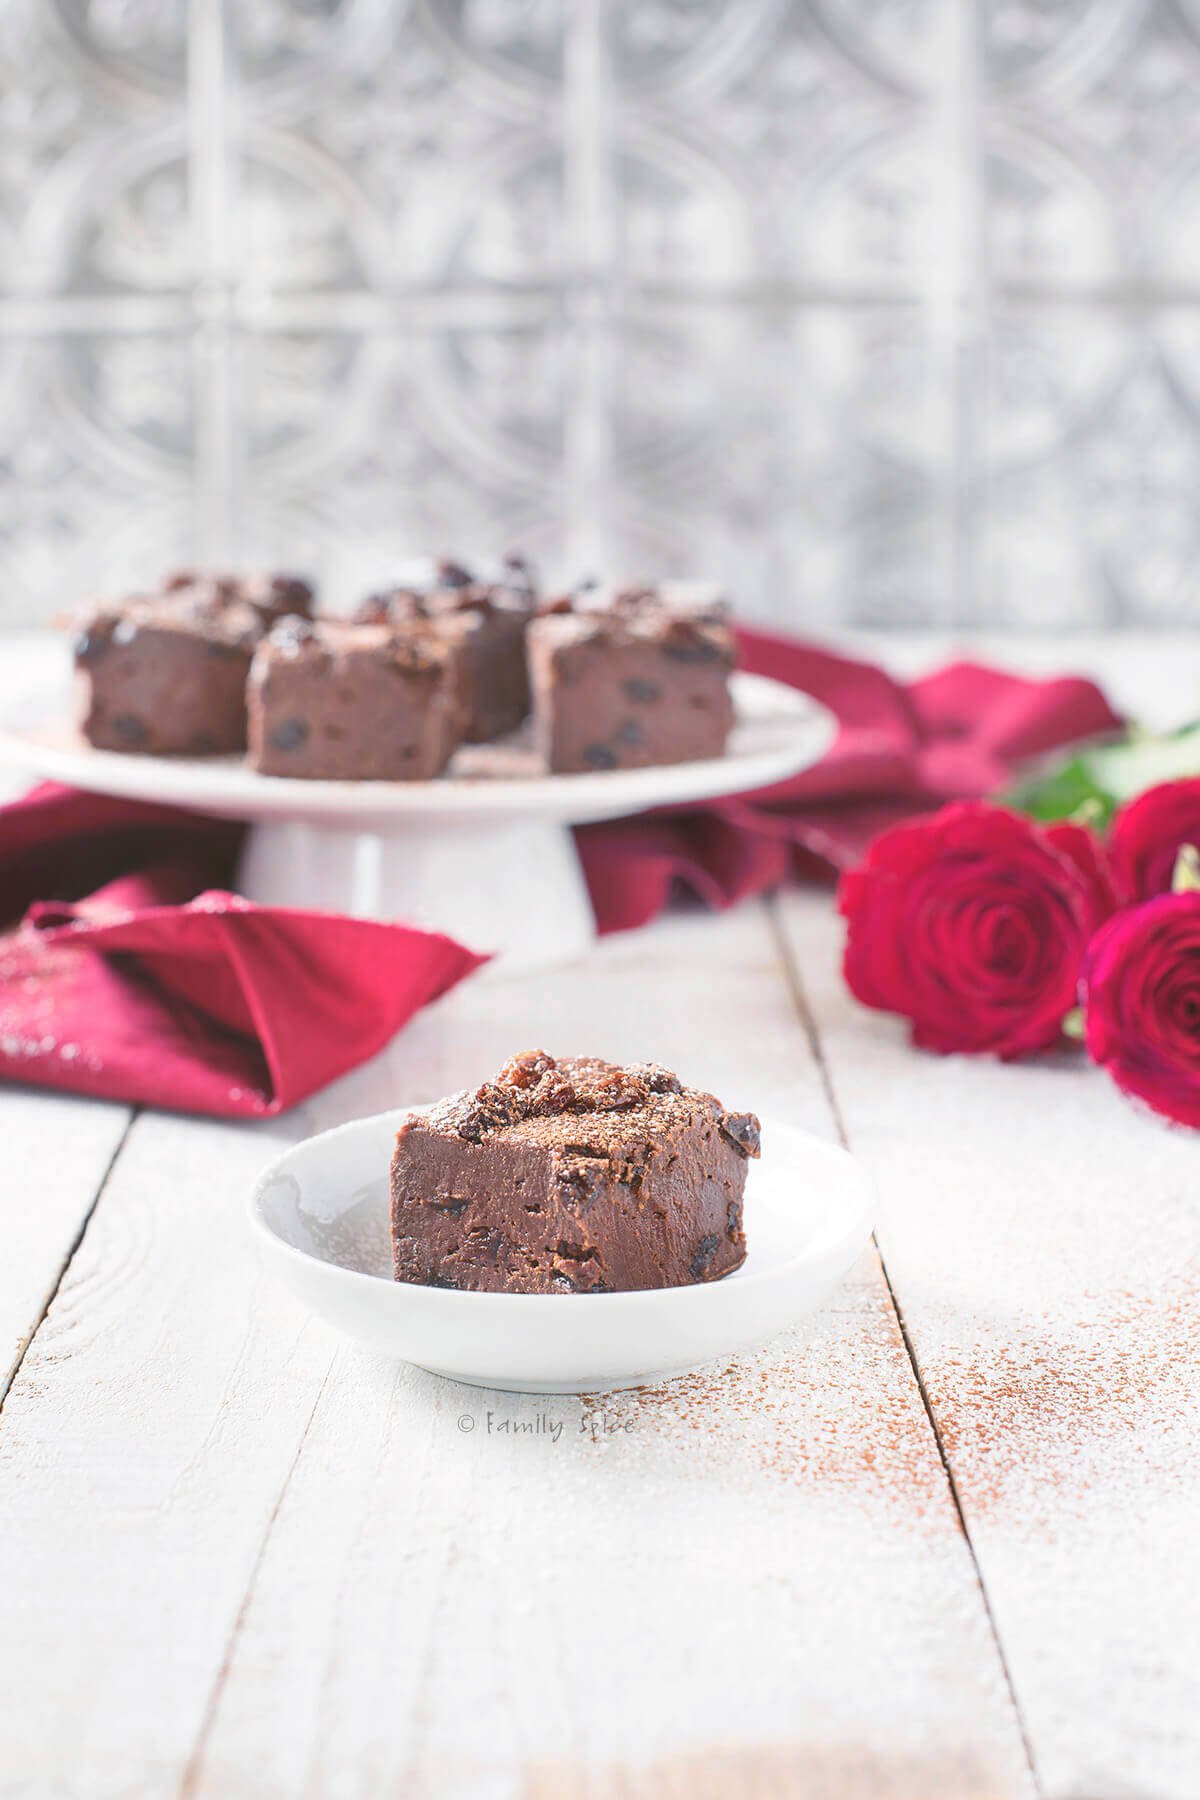 Closeup of Chocolate Rum Raisin Fudge on a White Cake Stand with Red Roses 